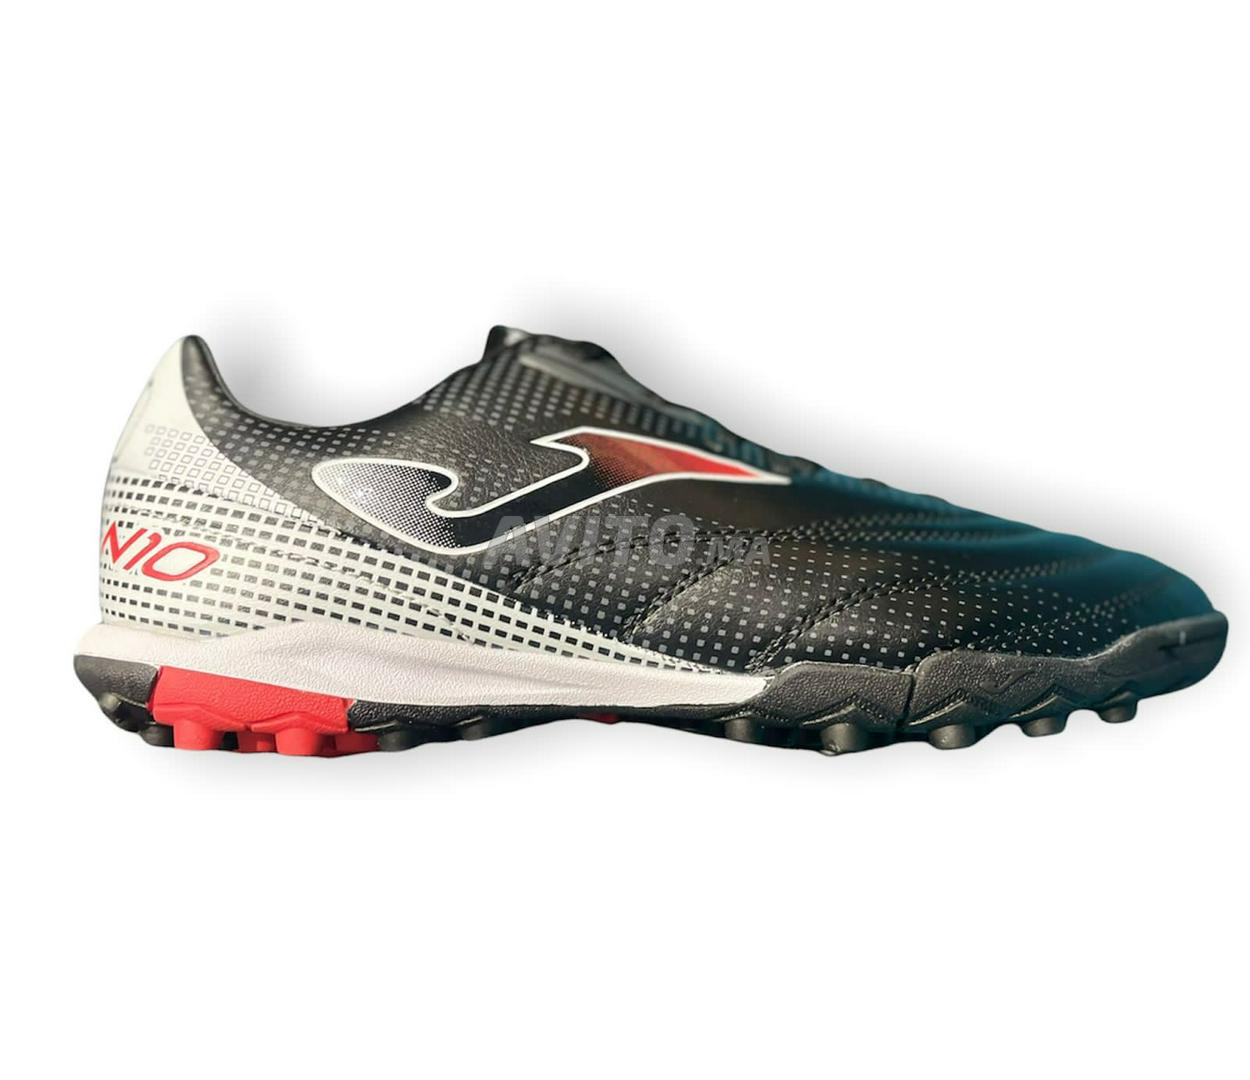 Chaussure foot joma gazon synthétique  - 3